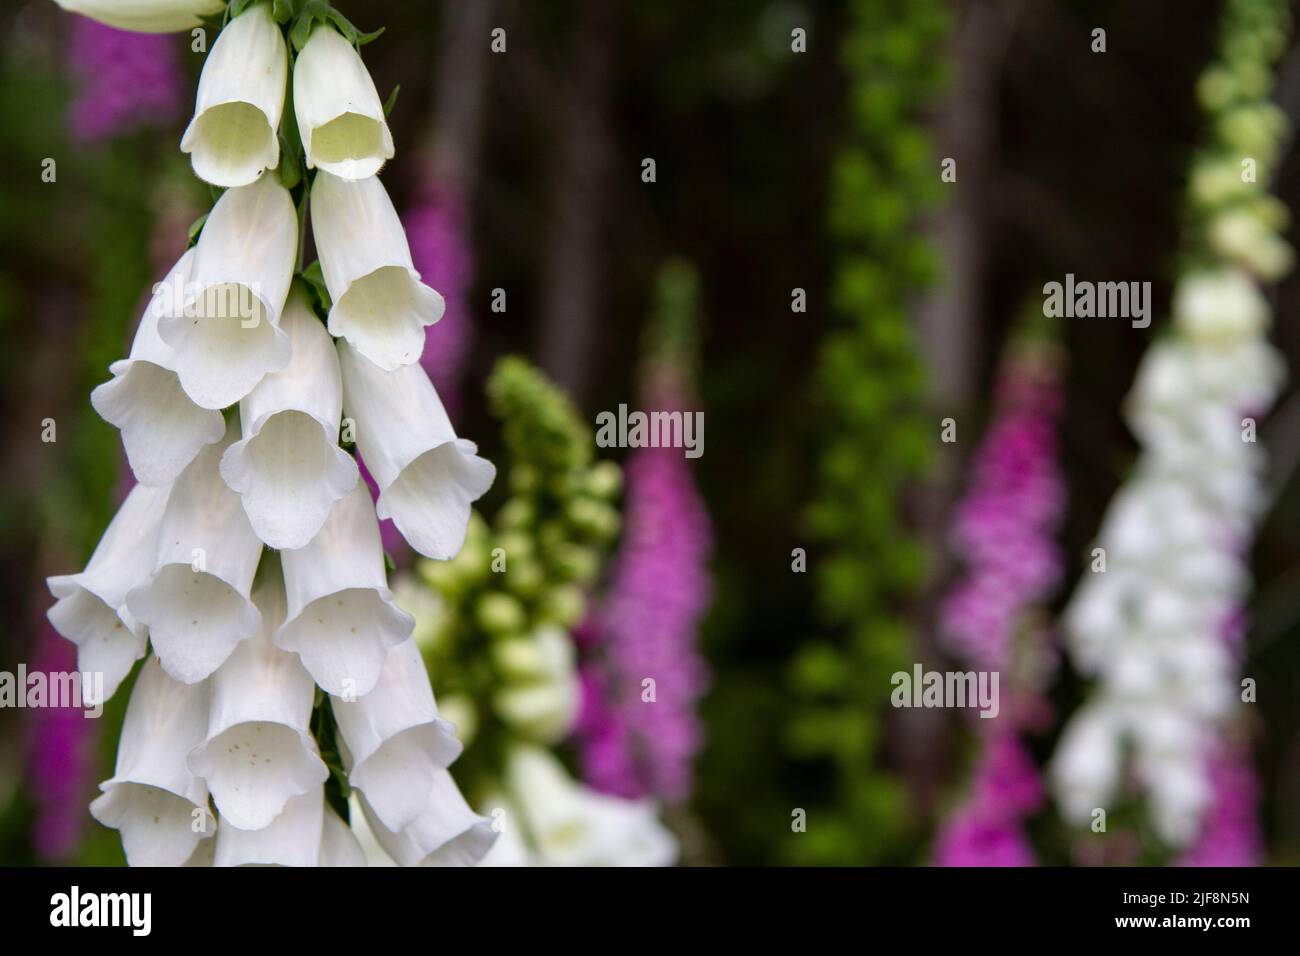 Closeup photograph of white Foxglove (Digitalis) in a meadow with soft focus purple and white Foxgloves in the background. Stock Photo